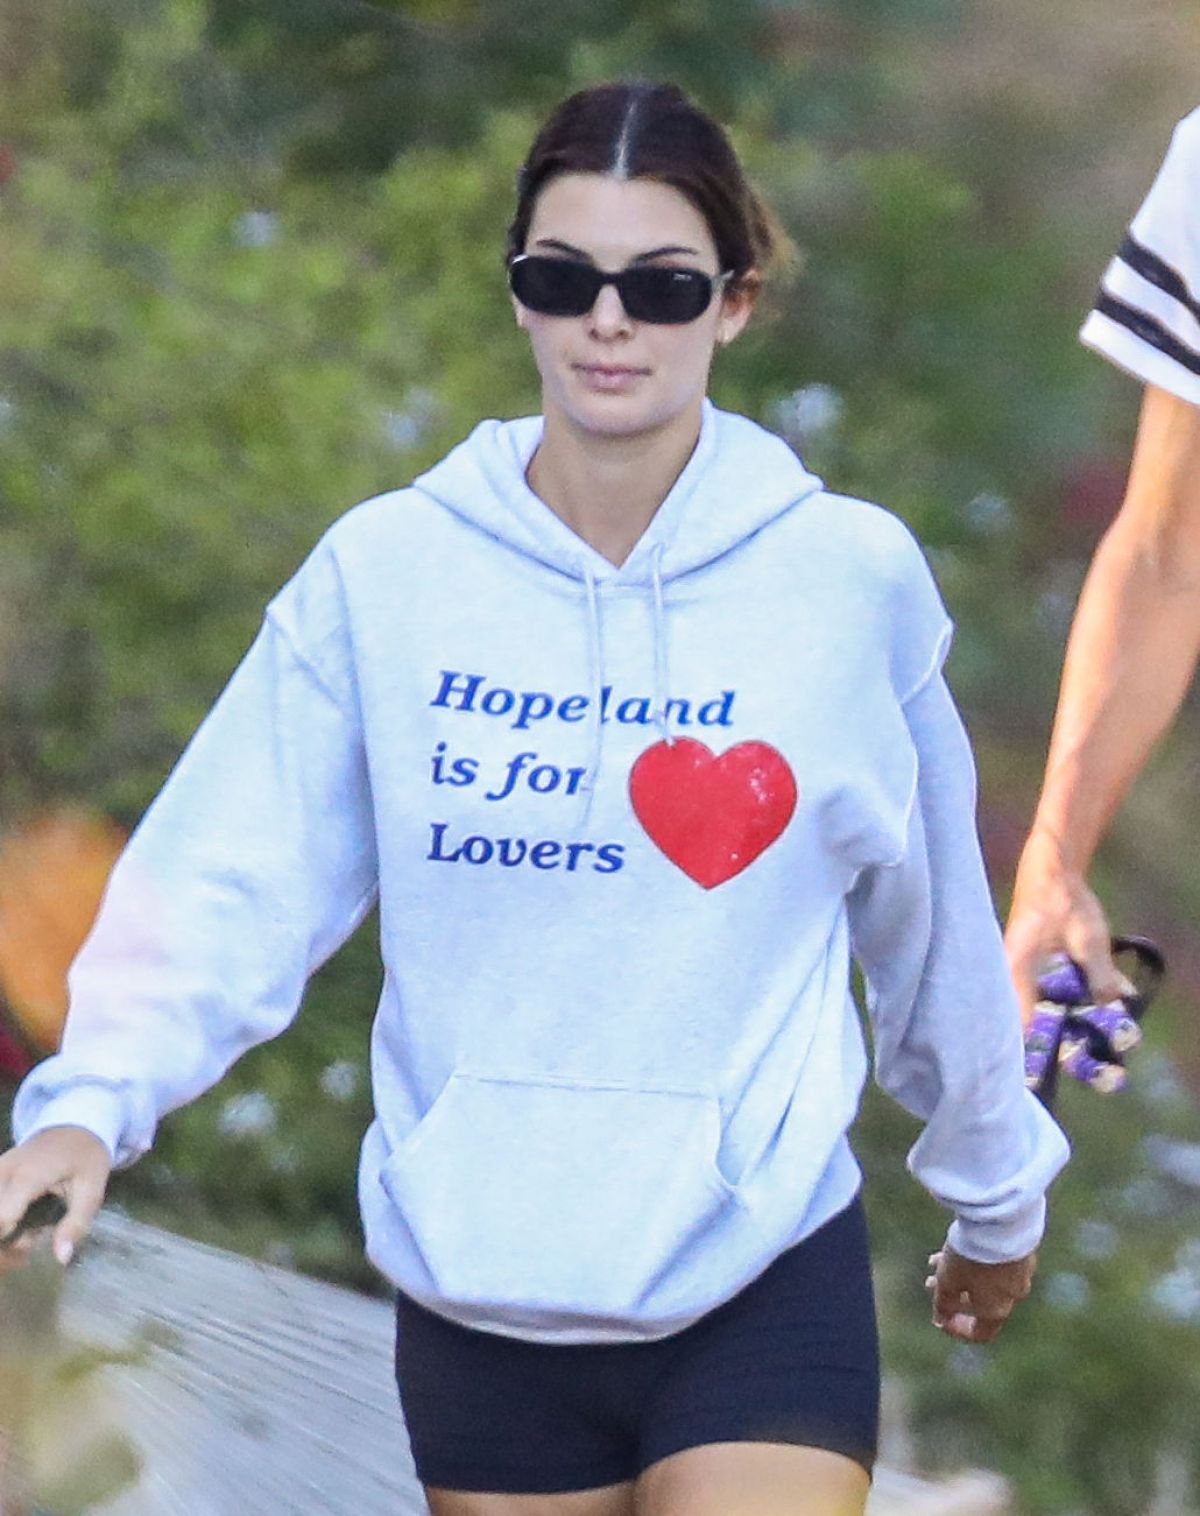 kendall-jenner-out-hiking-with-her-dad-caitlyn-jenner-in-malibu-08-01-2020-7.jpg